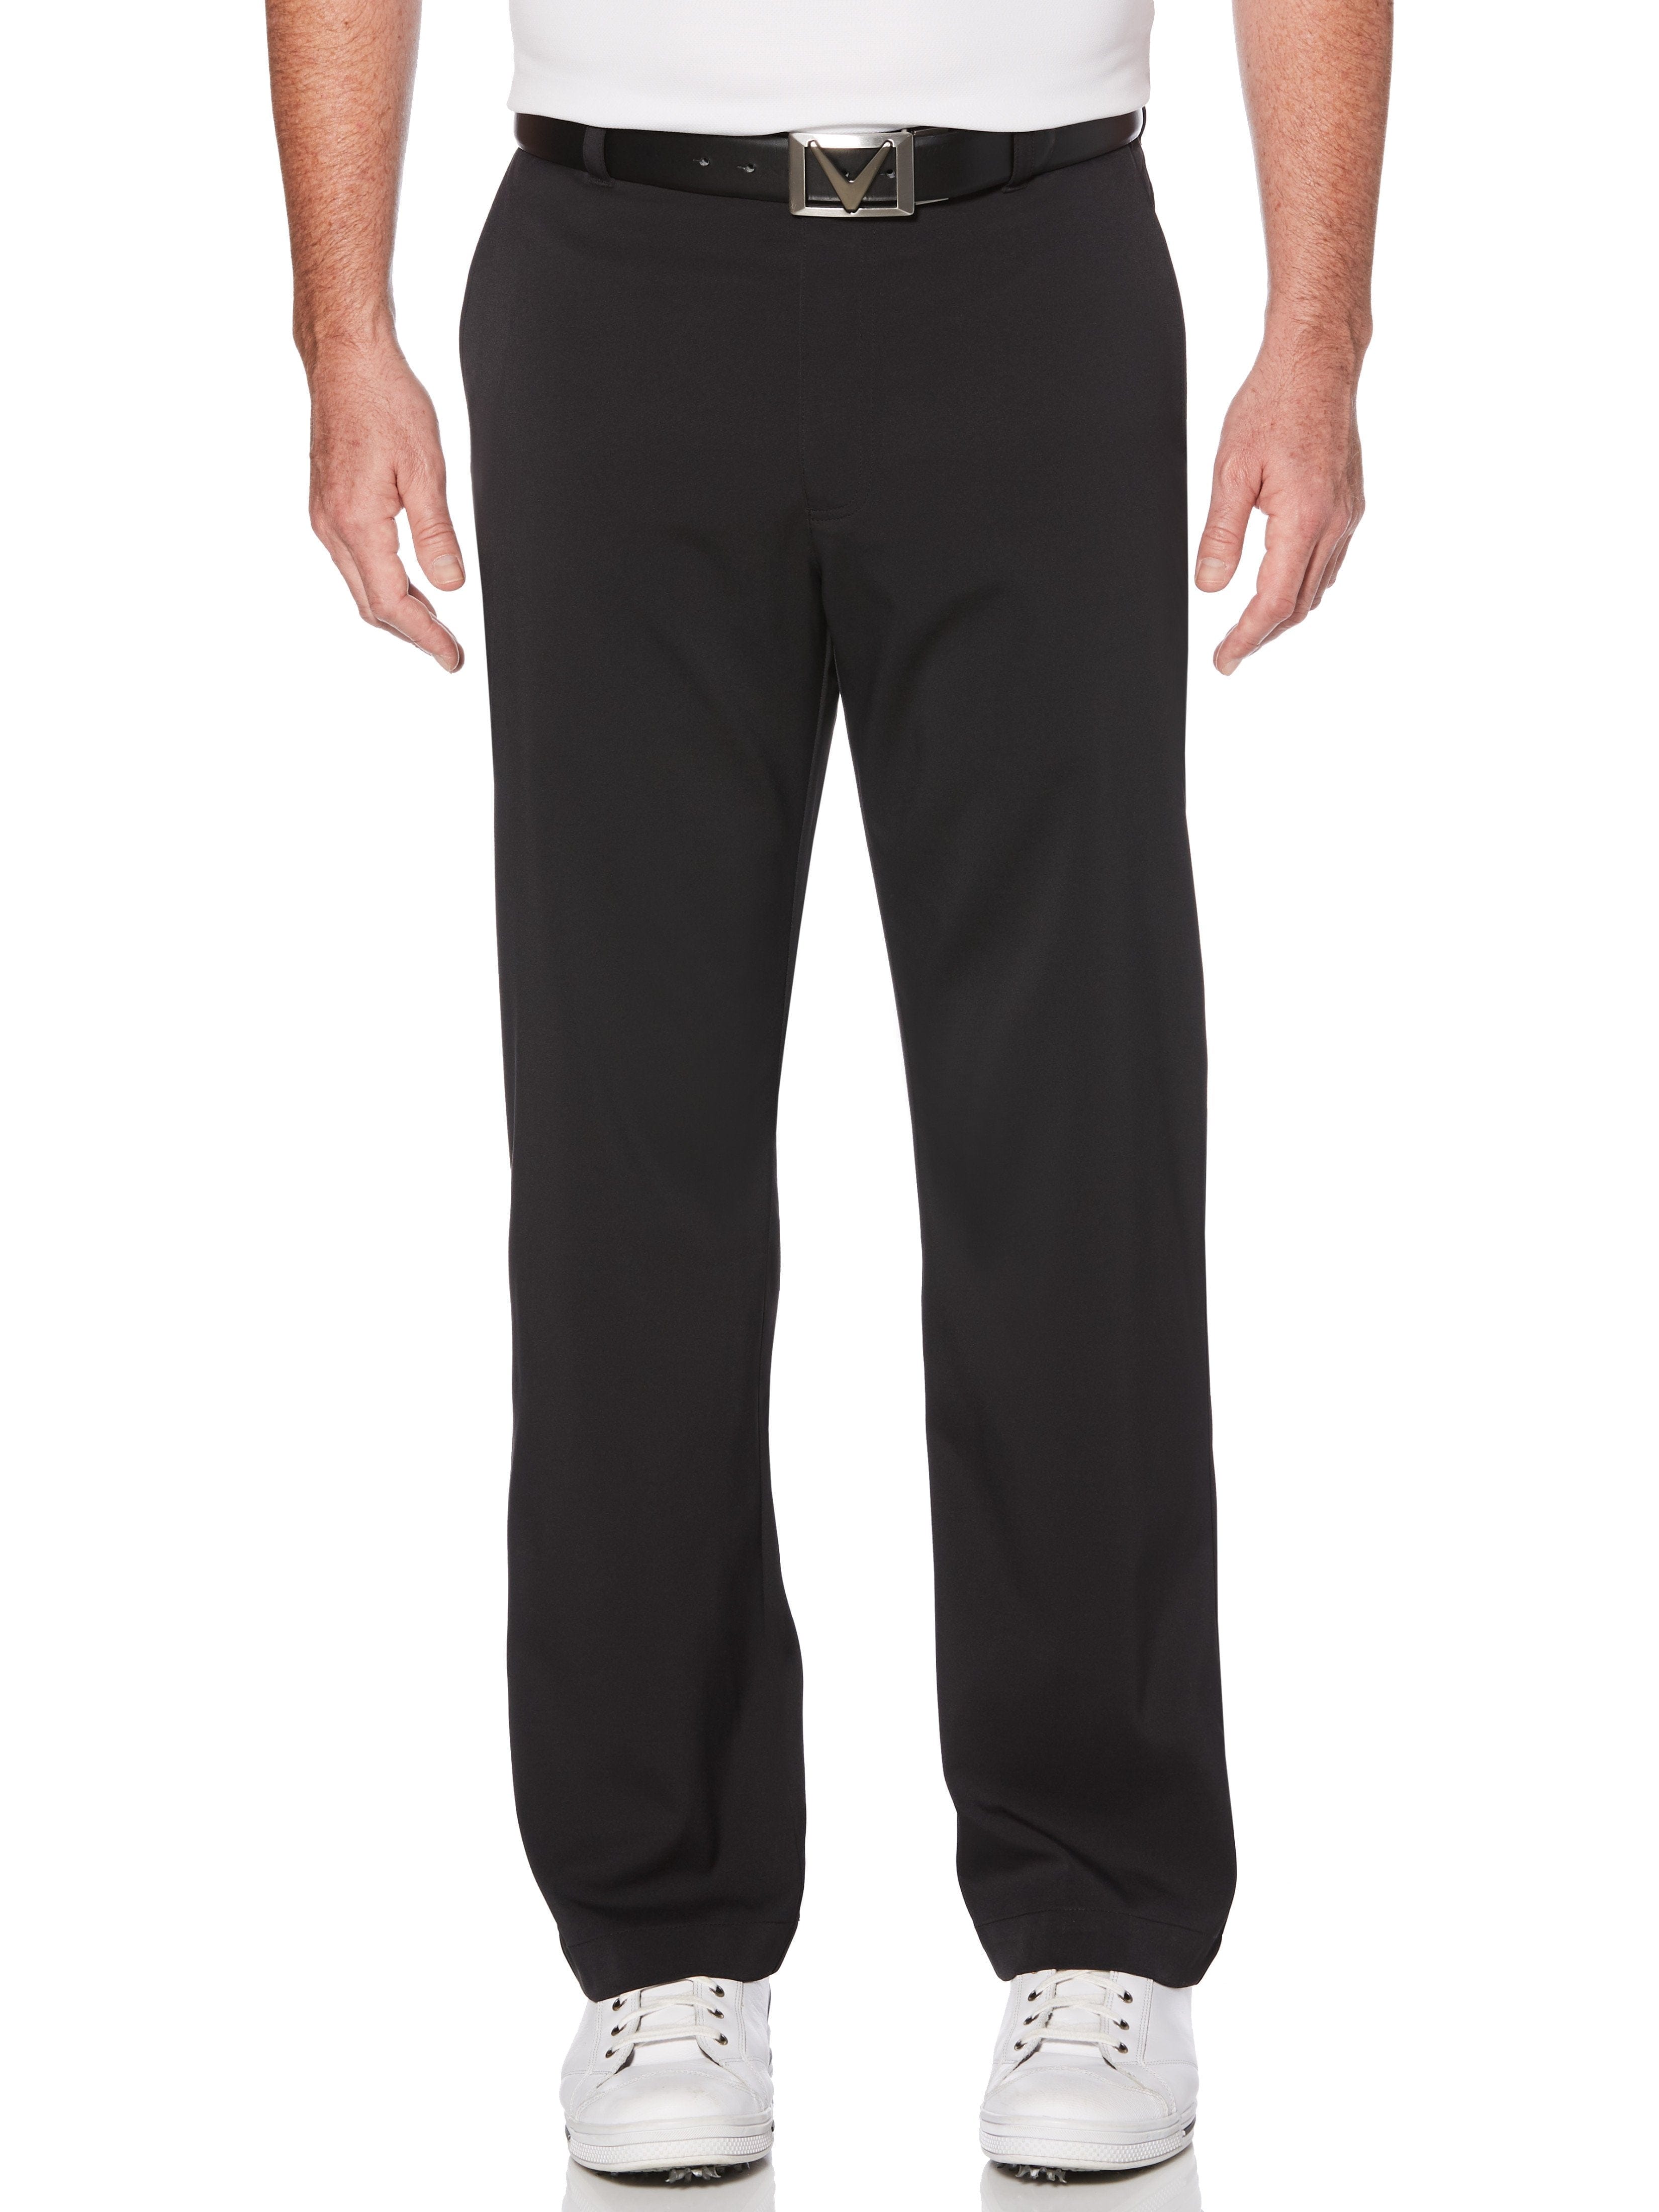 Big & Tall Pro Spin 3.0 Stretch Golf Pants with Active Waistband